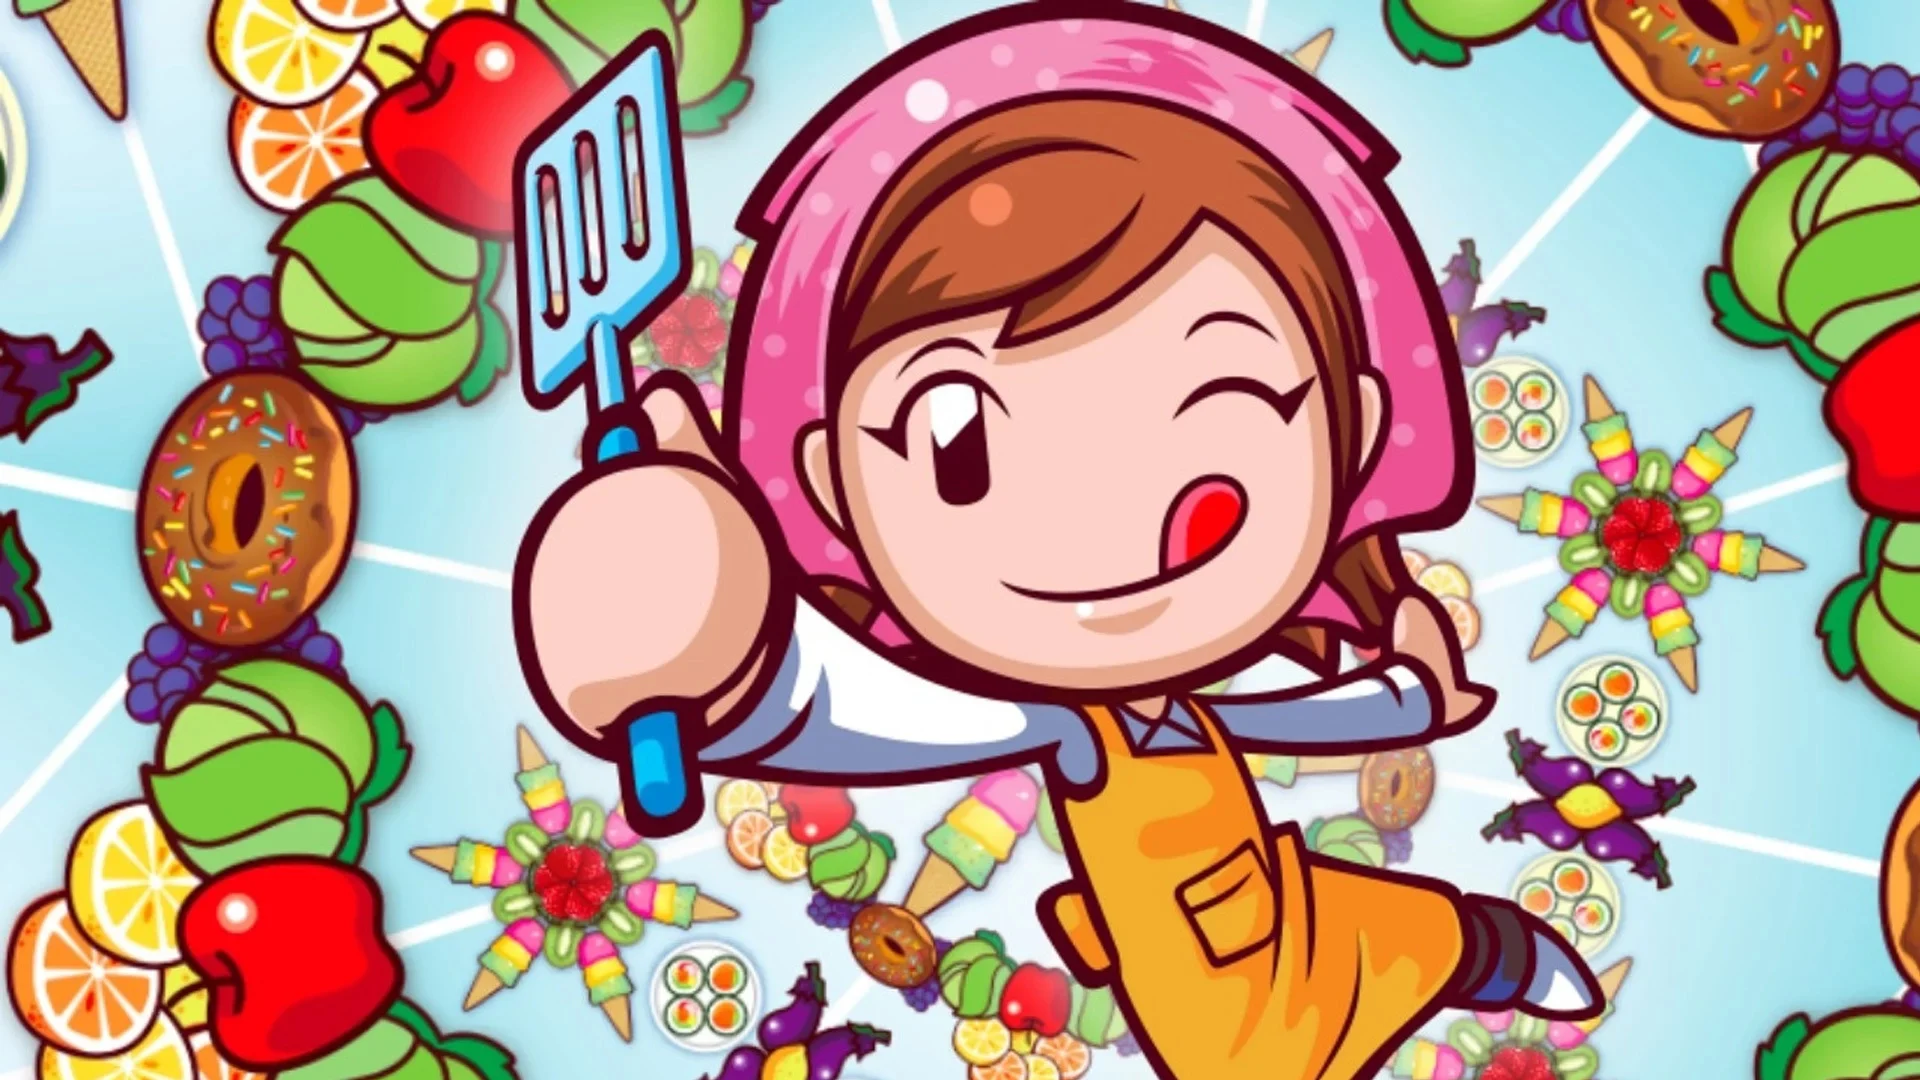 Cooking Mama: Cookstar is an “unauthorised” game, says Japanese Cooking Mama studio